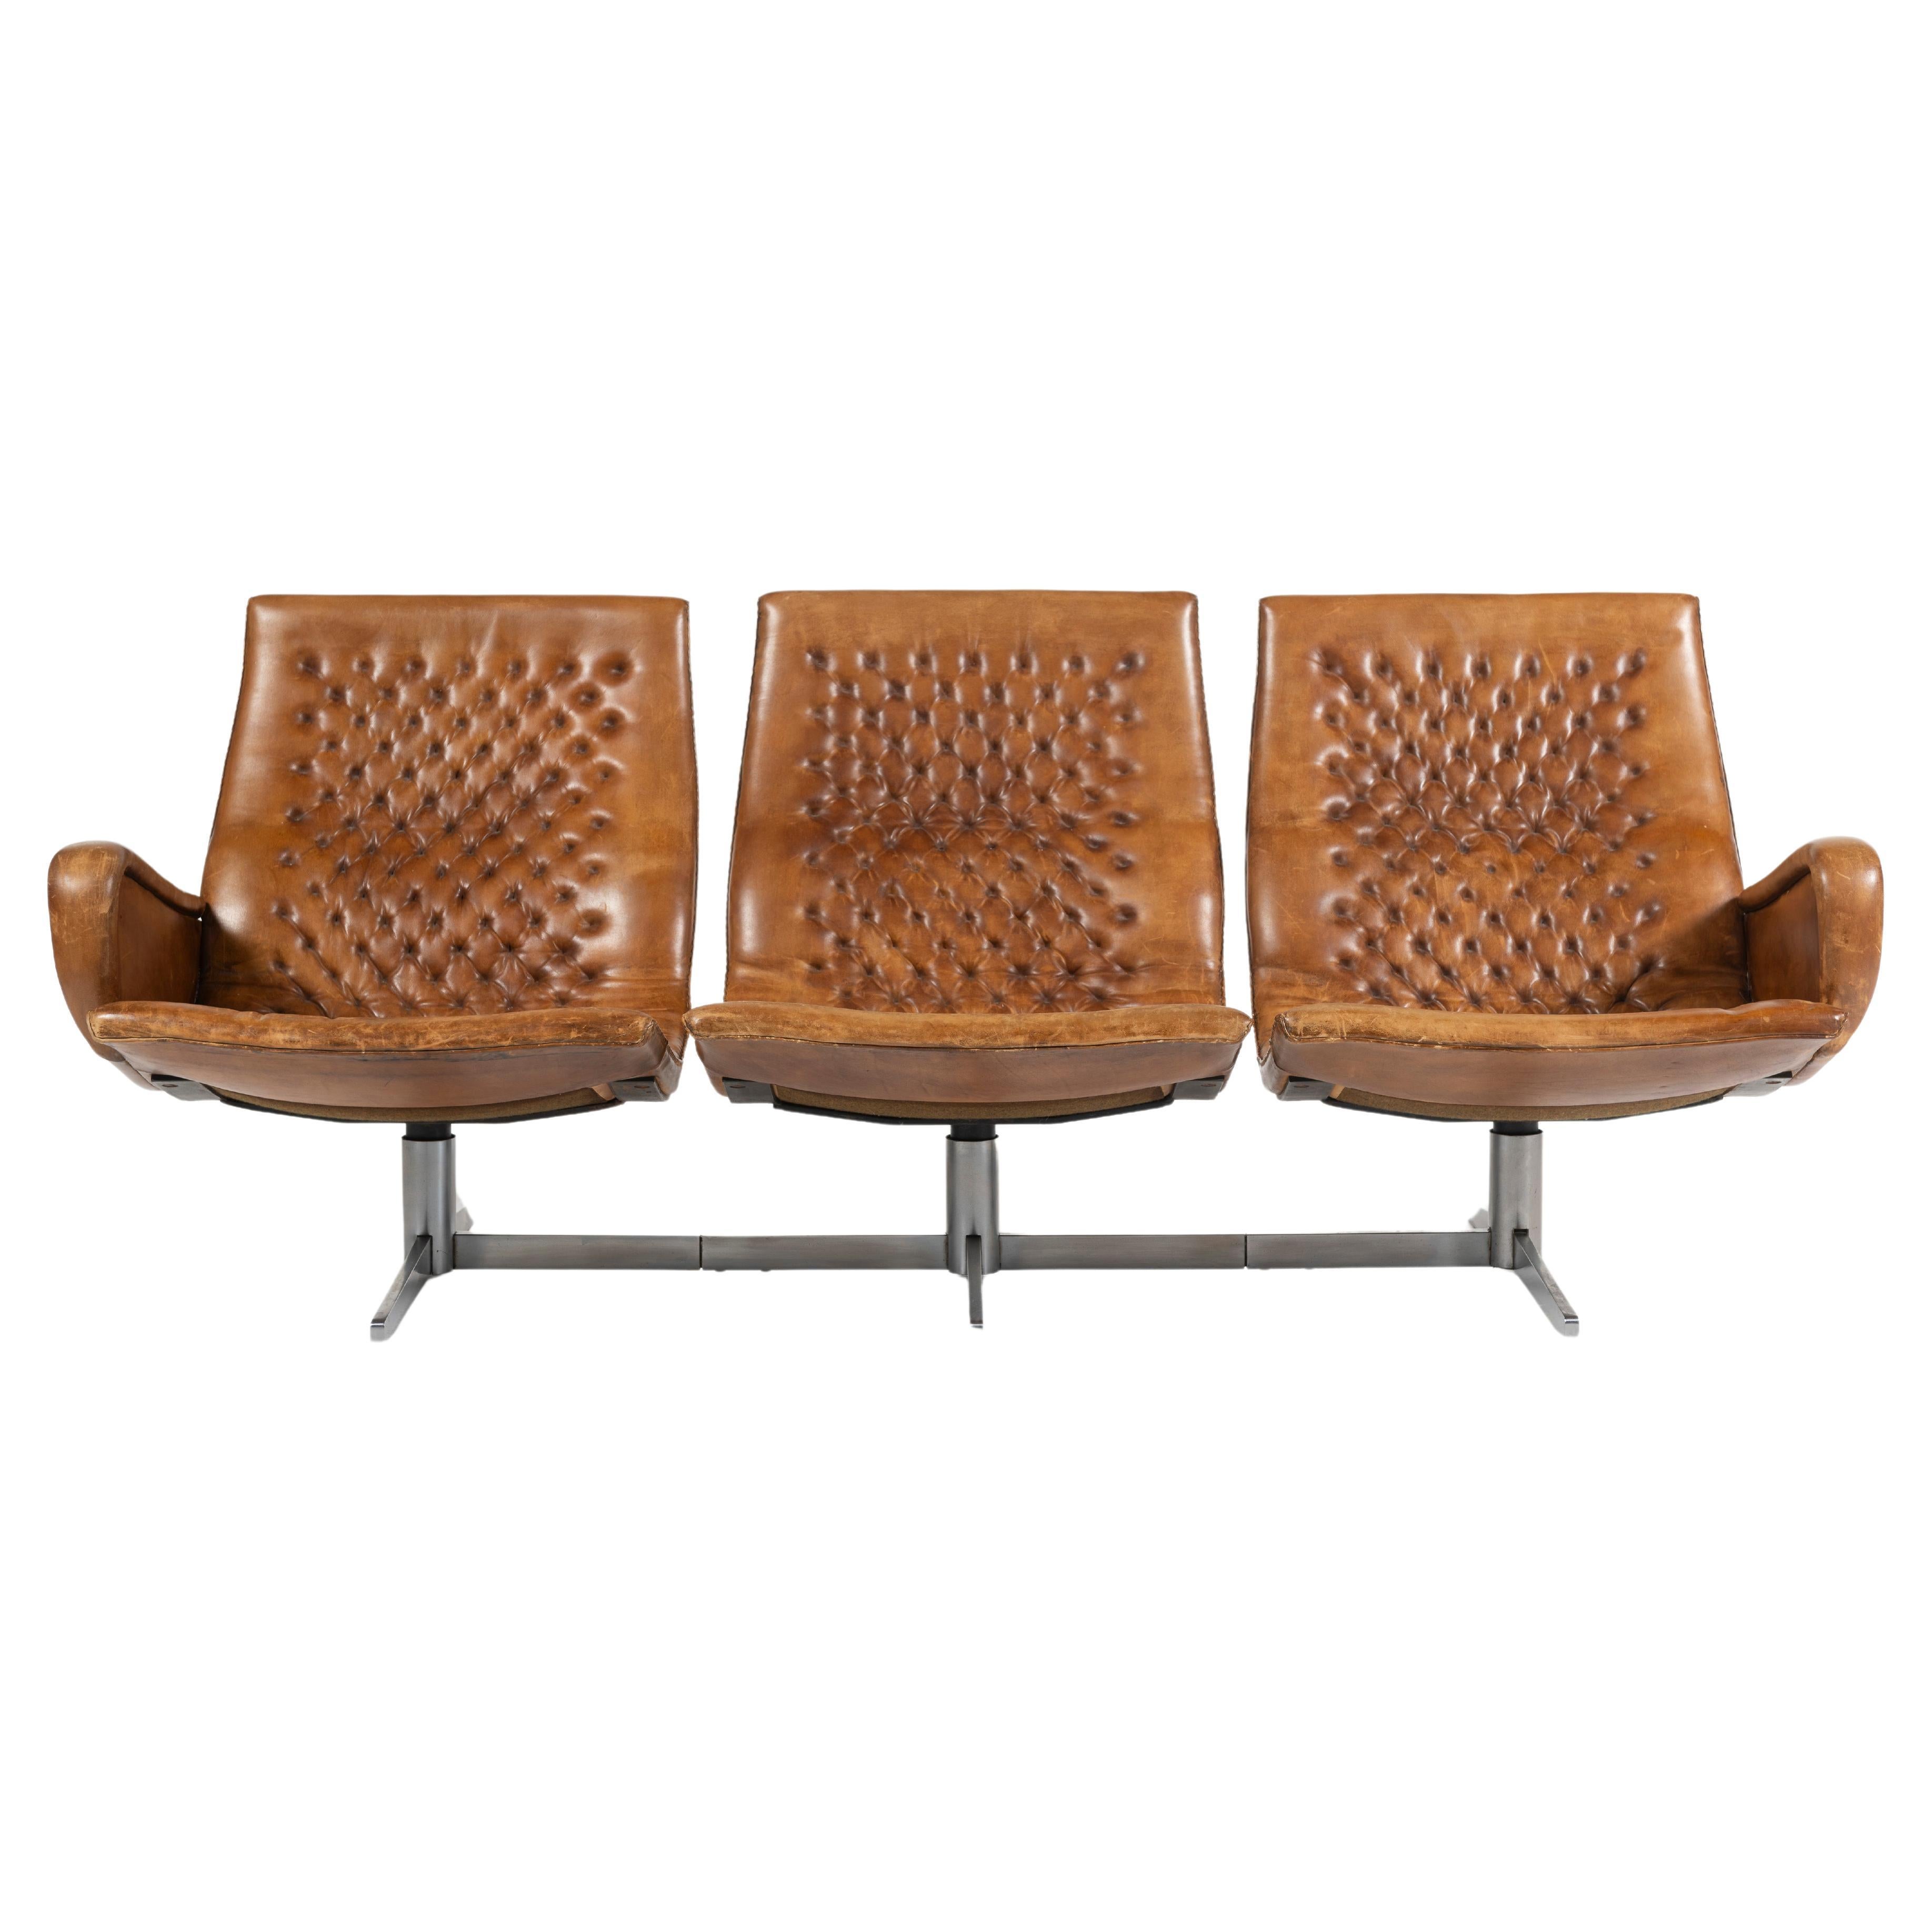 De Sede Three Seat Tufted Sofa in Teak Leather, Swiss, 1970s For Sale